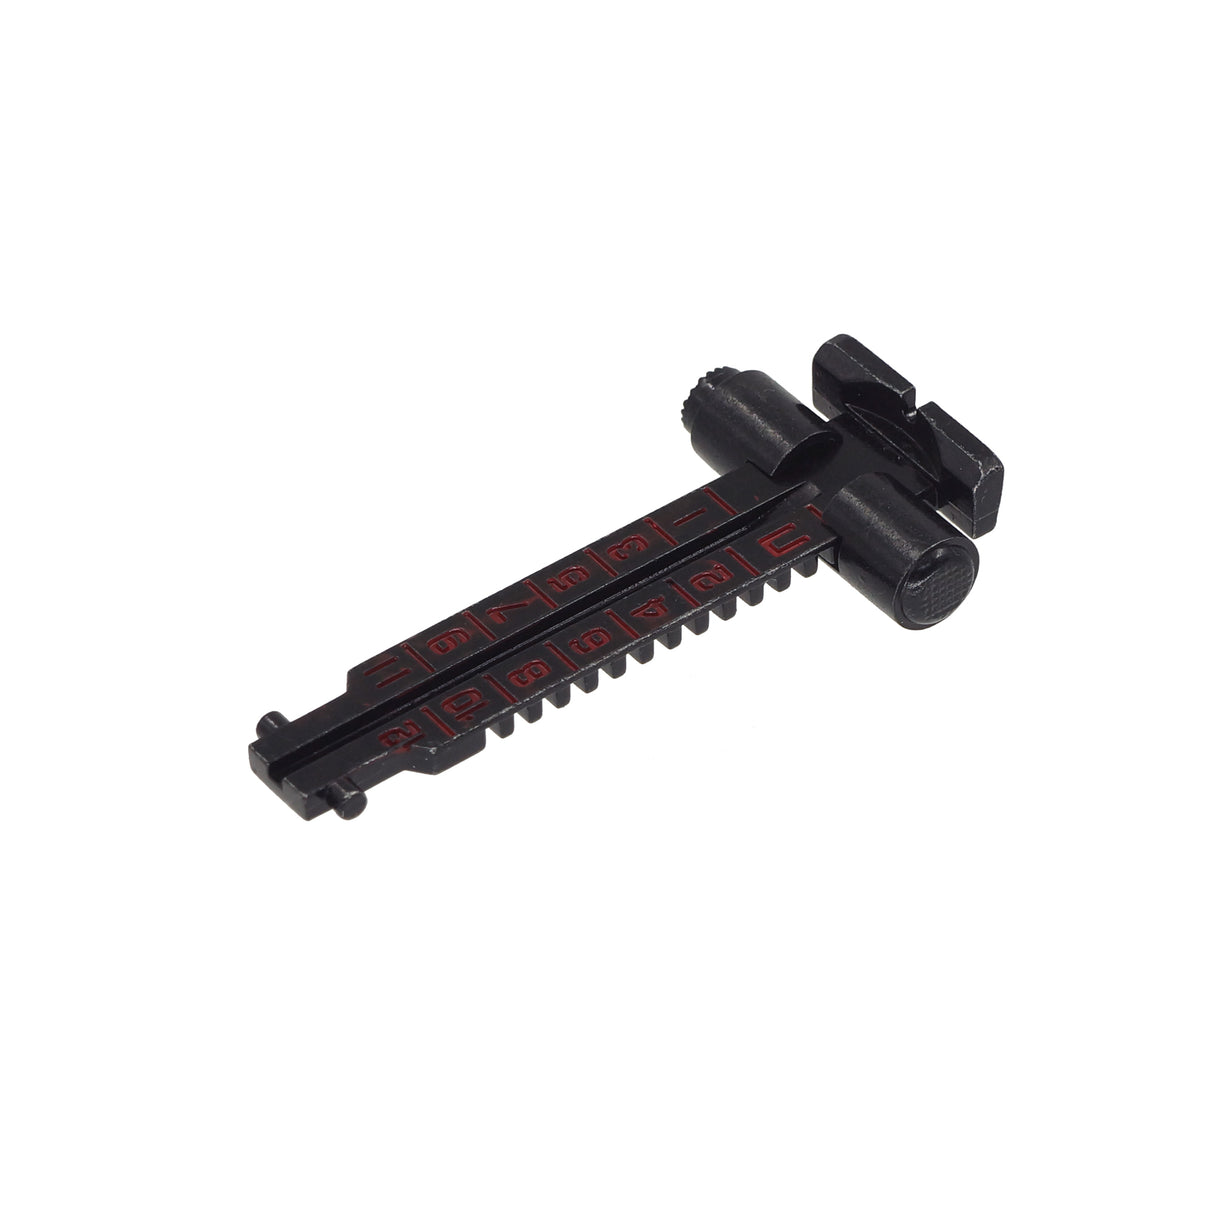 CYMA 1200m Rear Sight for SVD Series ( HY107 )